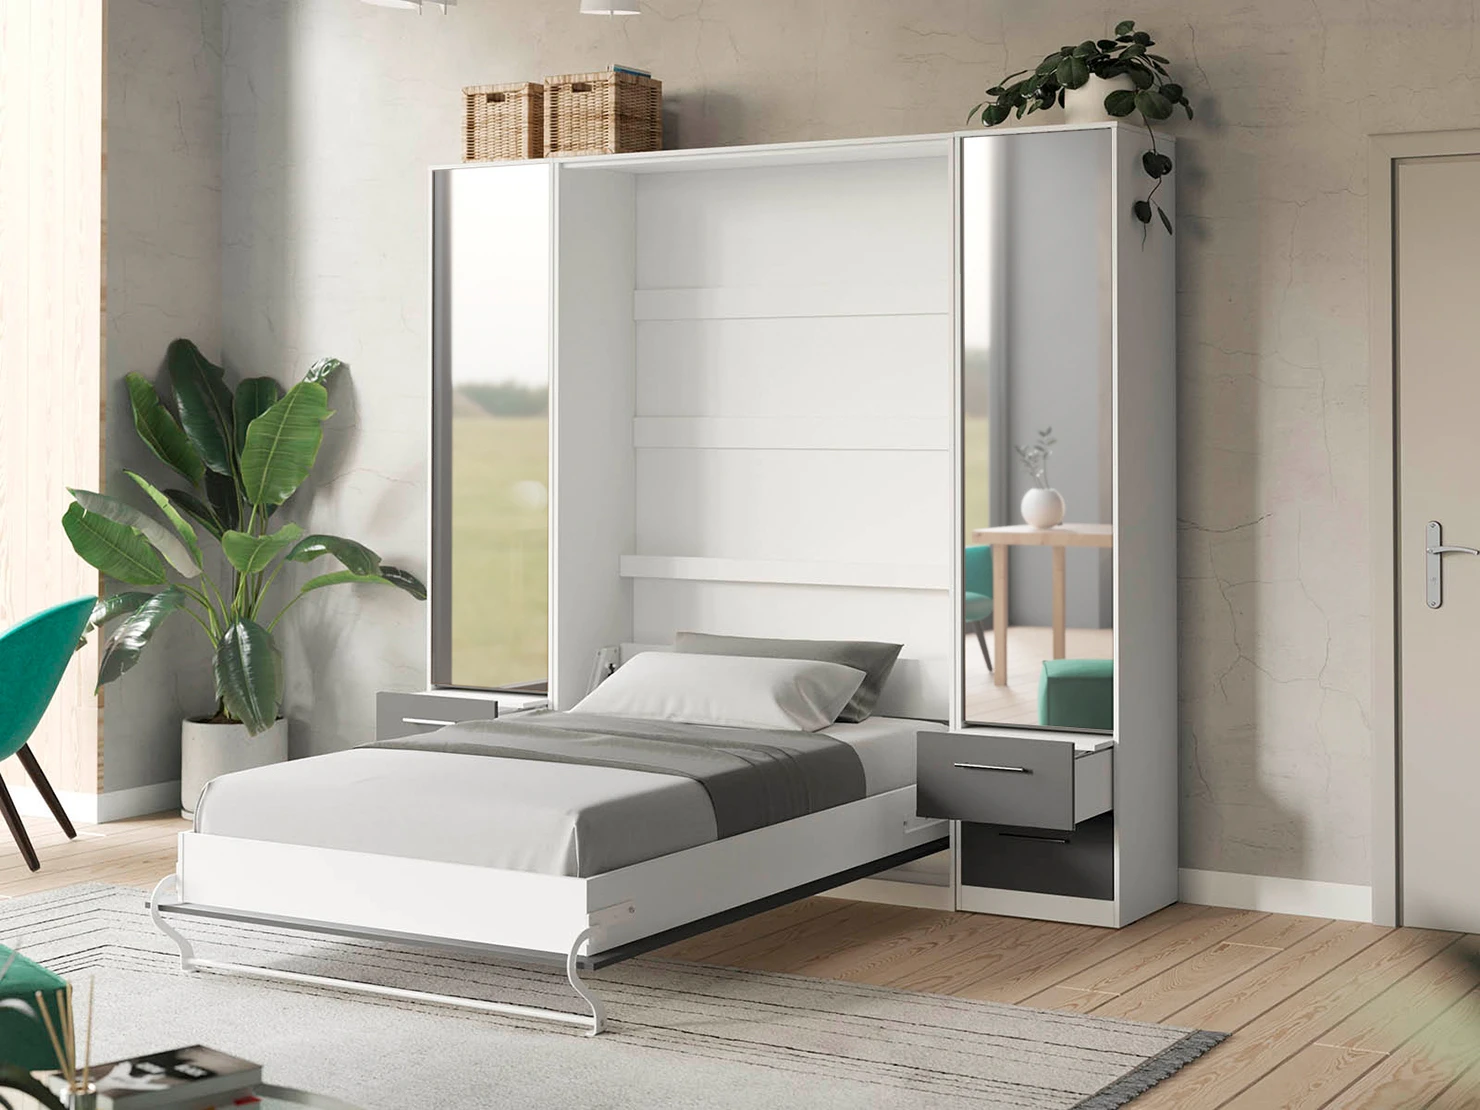 2 Murphy Bed SET 140x200cm Vertical + 2x Cabinets 50cm White/Anthracite with Mirror